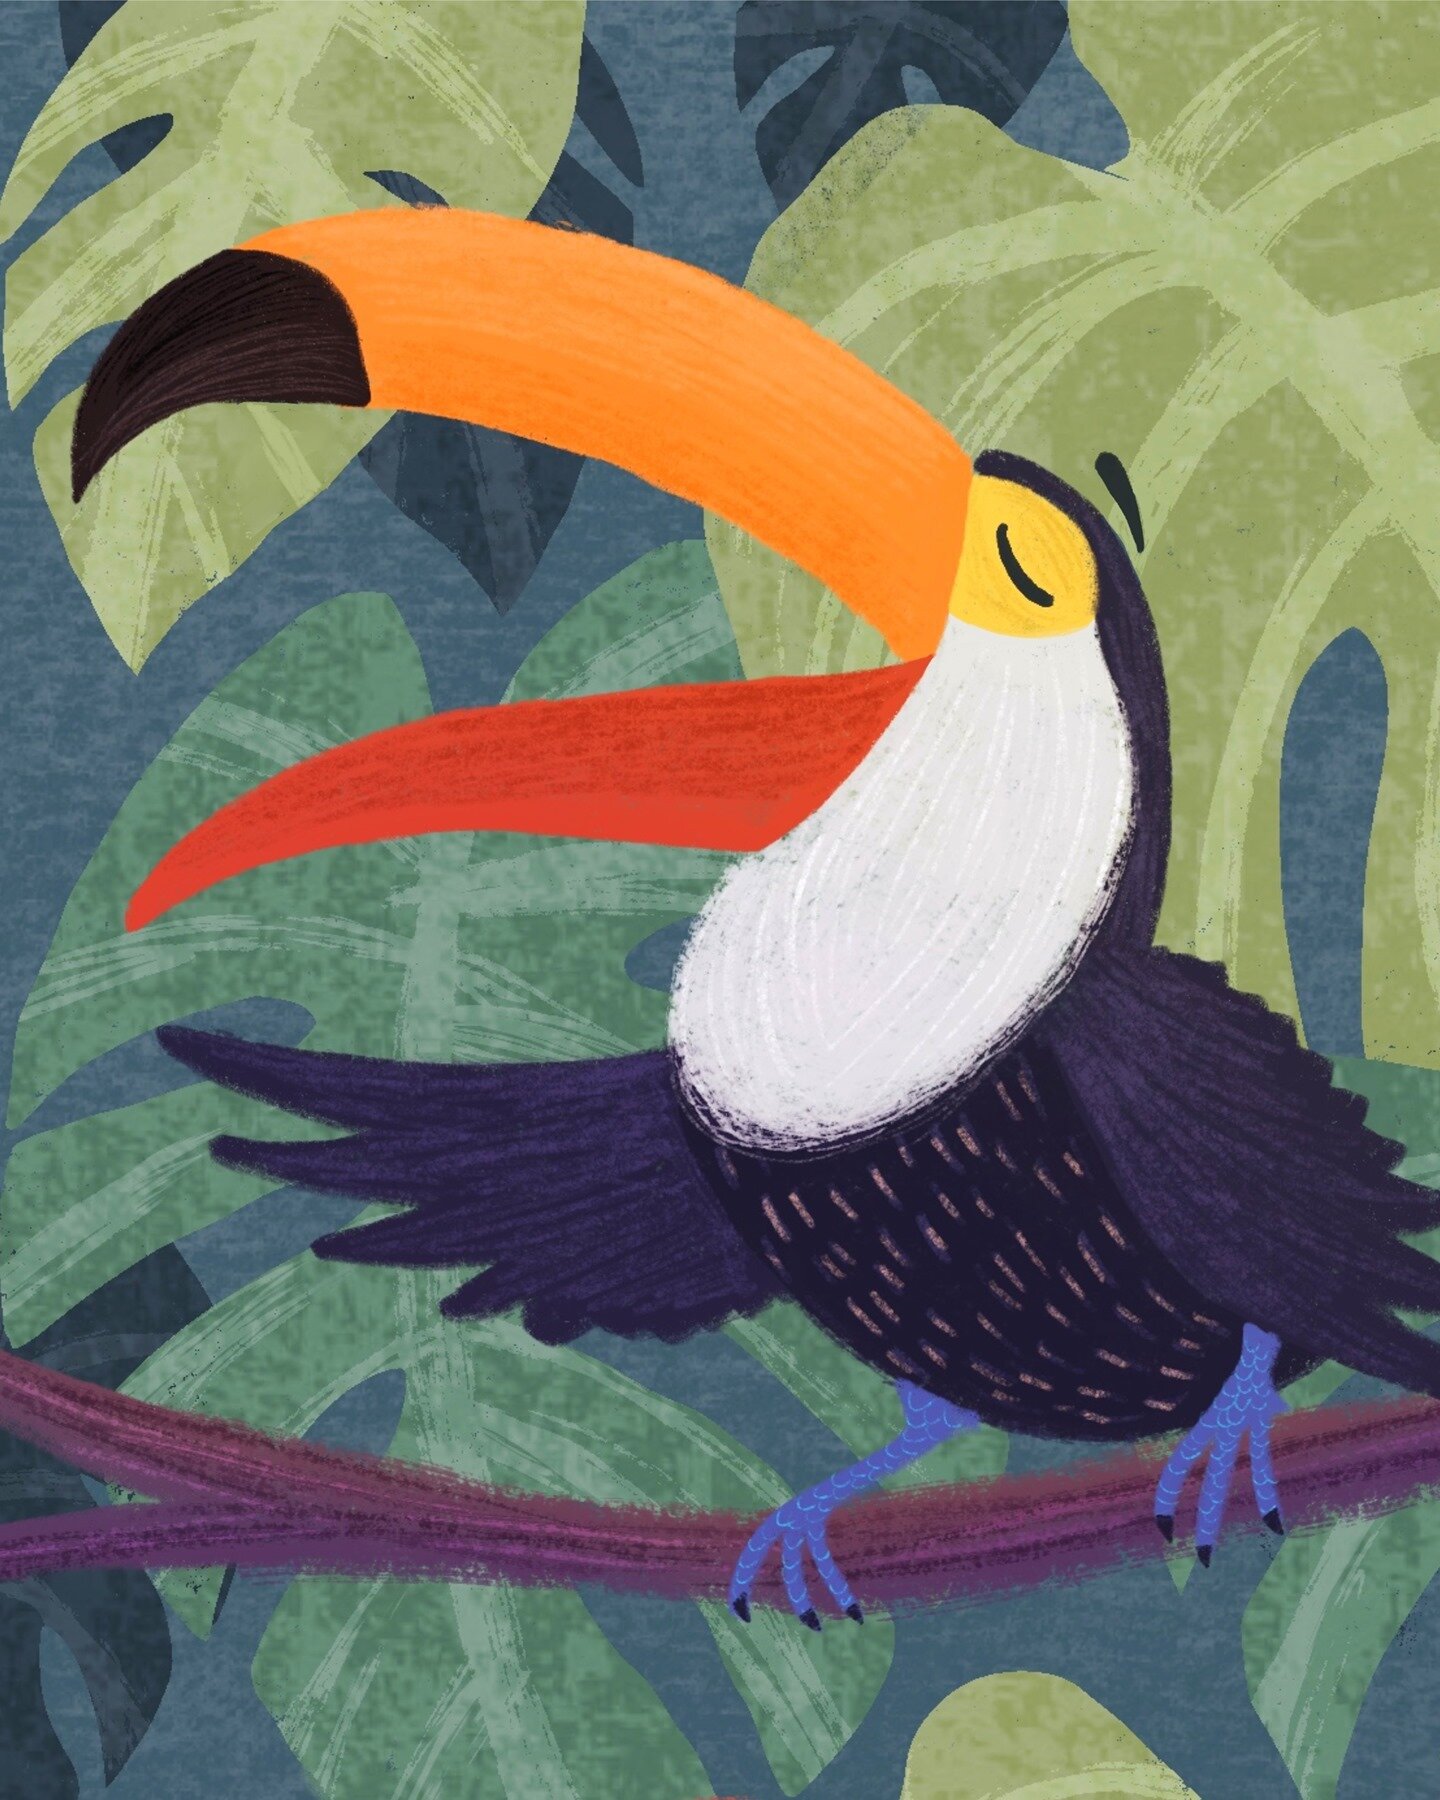 A toucan enthralled by his own song (though not sure if the rest of the jungle is!) 🎶  I'm still working on lots of projects I can't reveal just yet, but hopefully soon! 🤗⁠
.⁠
.⁠
.⁠
.⁠
.⁠
.⁠
.⁠
.⁠
.⁠
.⁠
#picturebookillustrations #childrensillustrat